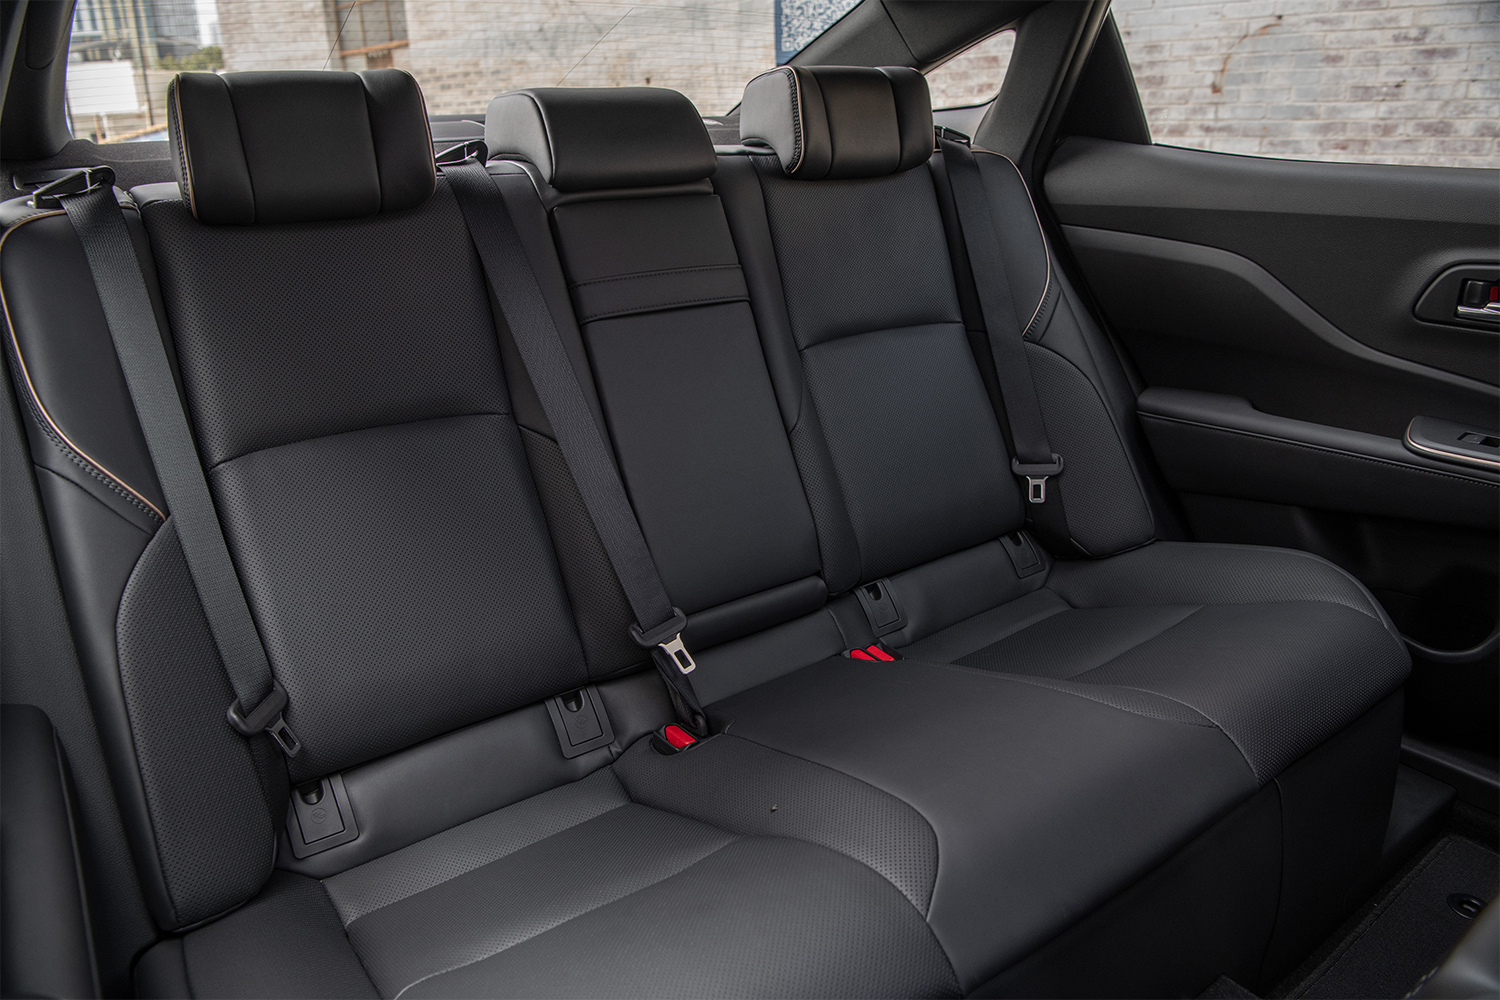 The rear seats in the Toyota Crown all fold down